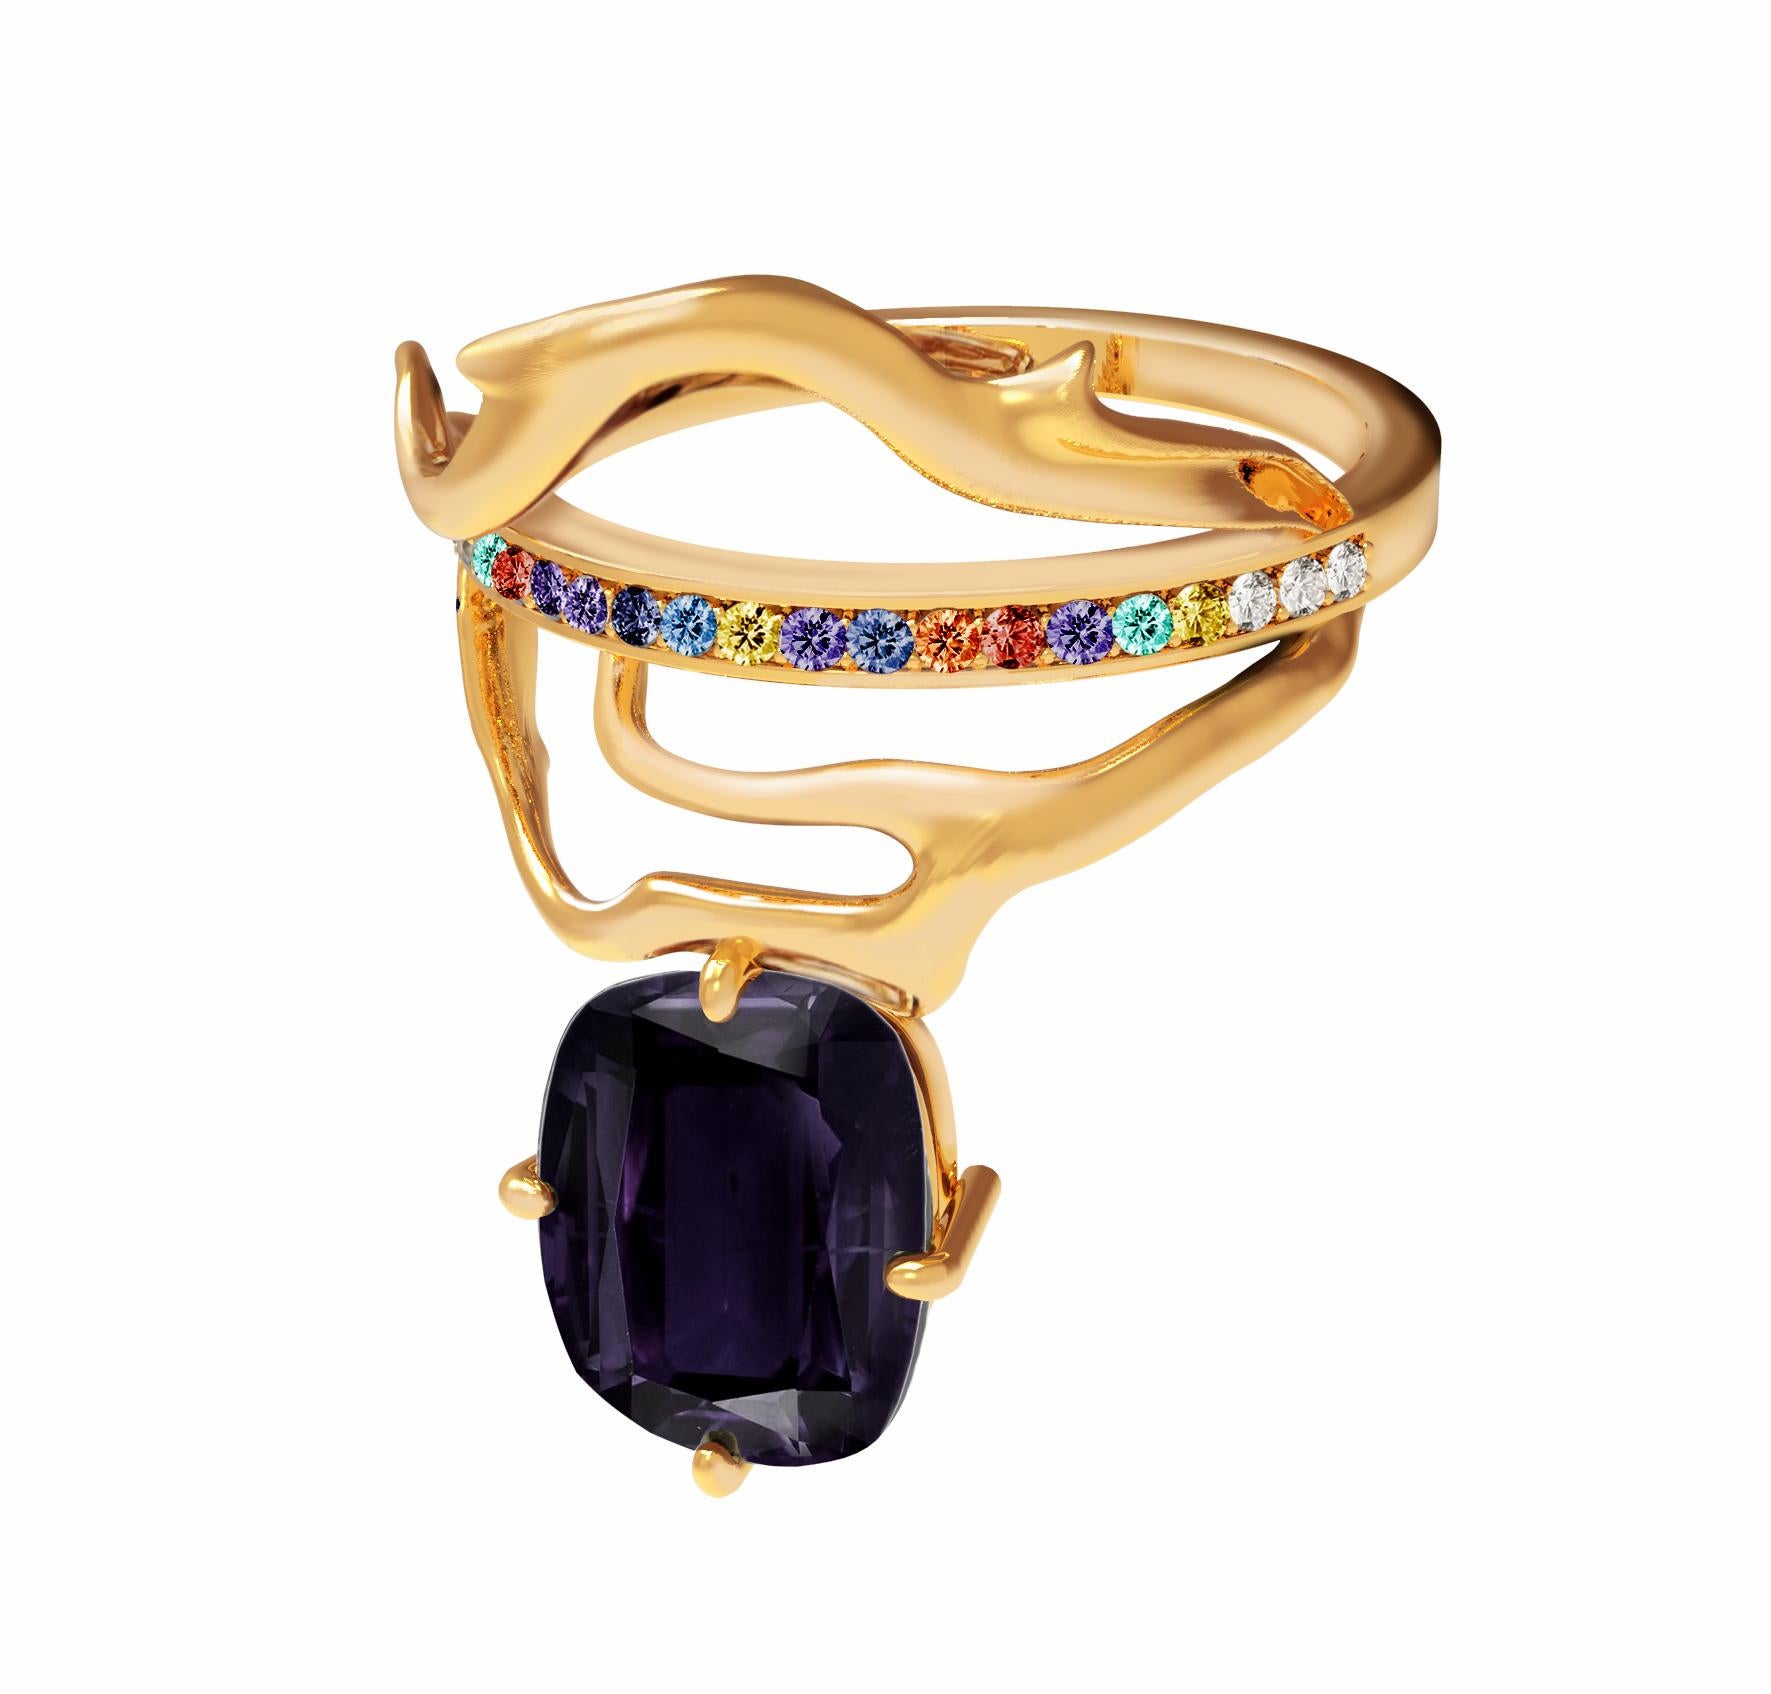 Contemporary 18 Karat Rose Gold Tibetan Fashion Spinel Ring with Sapphires and Diamonds For Sale